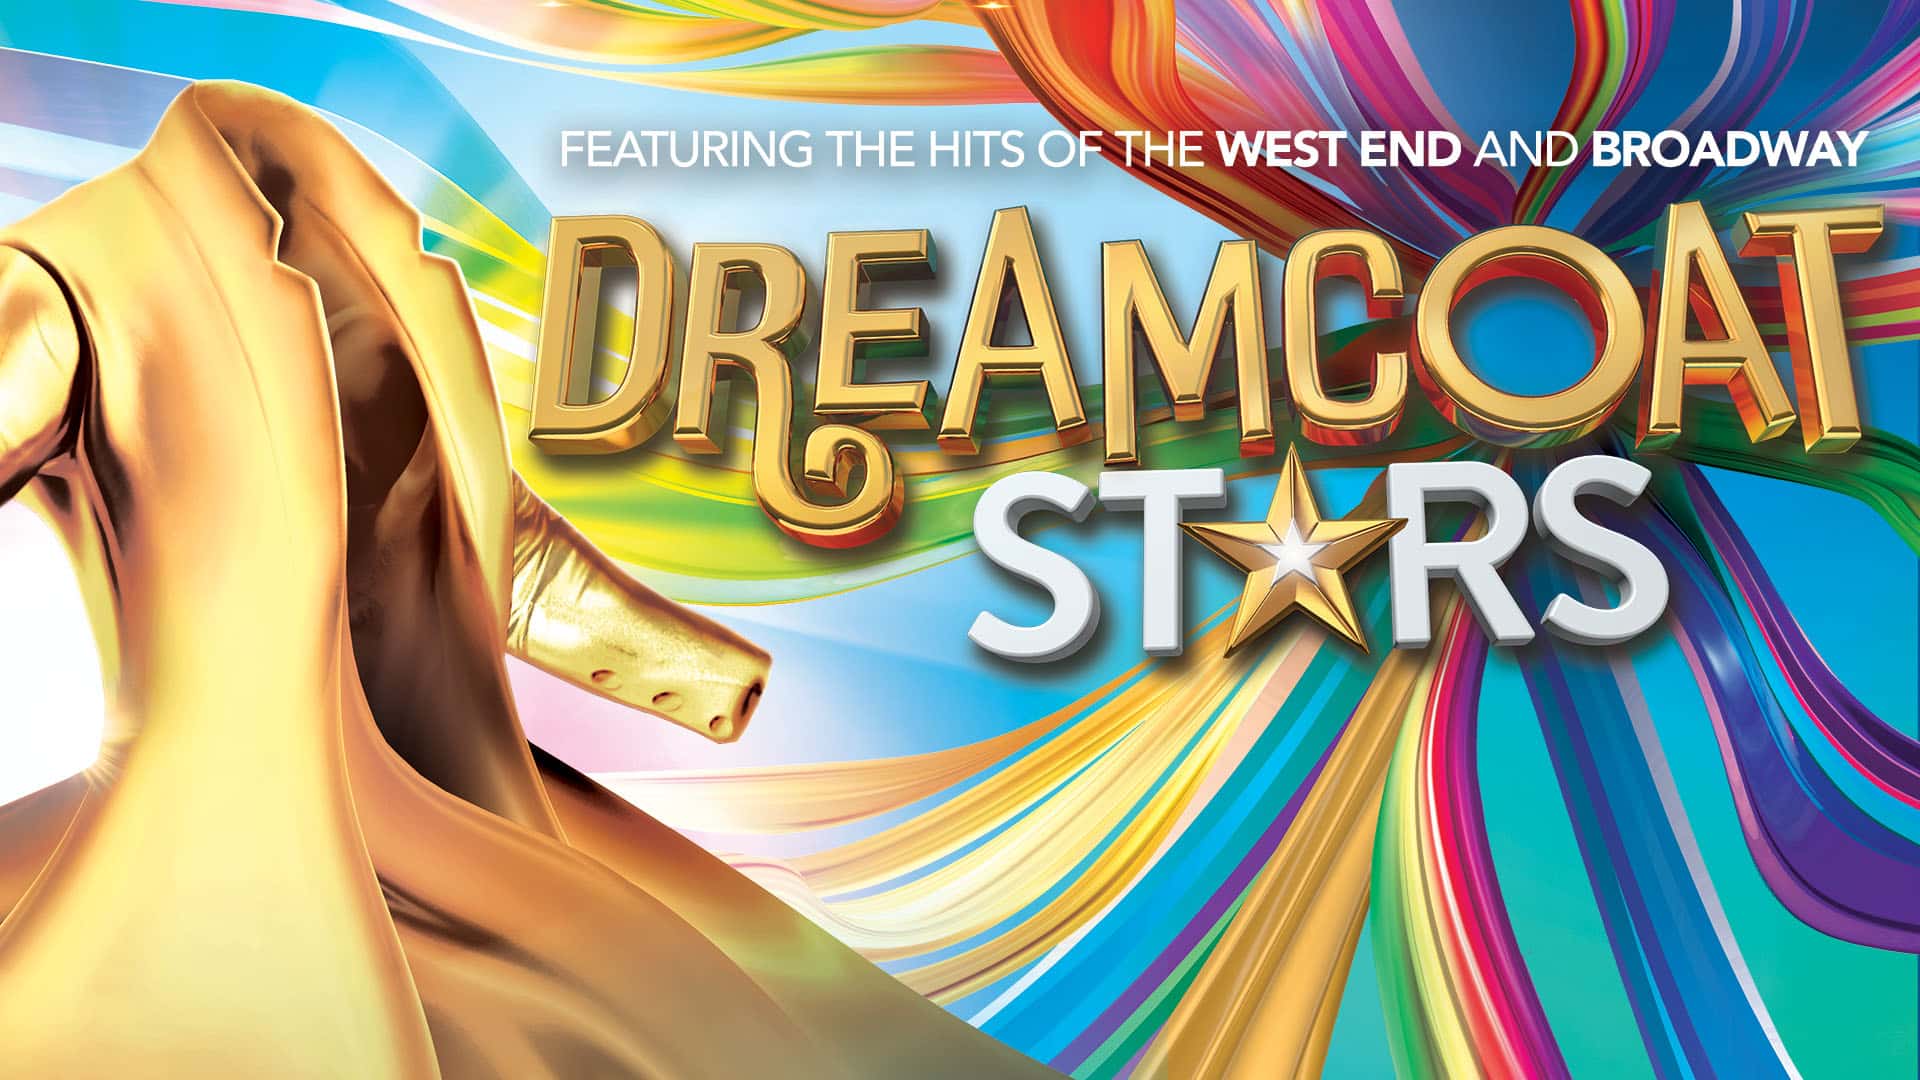 Dreamcoat Stars artwork - A golden coat to the left of the image above a background made up of technicolour waves. Text reads: Dreamcoat Stars; Featuring the hits of the West End and Broadway